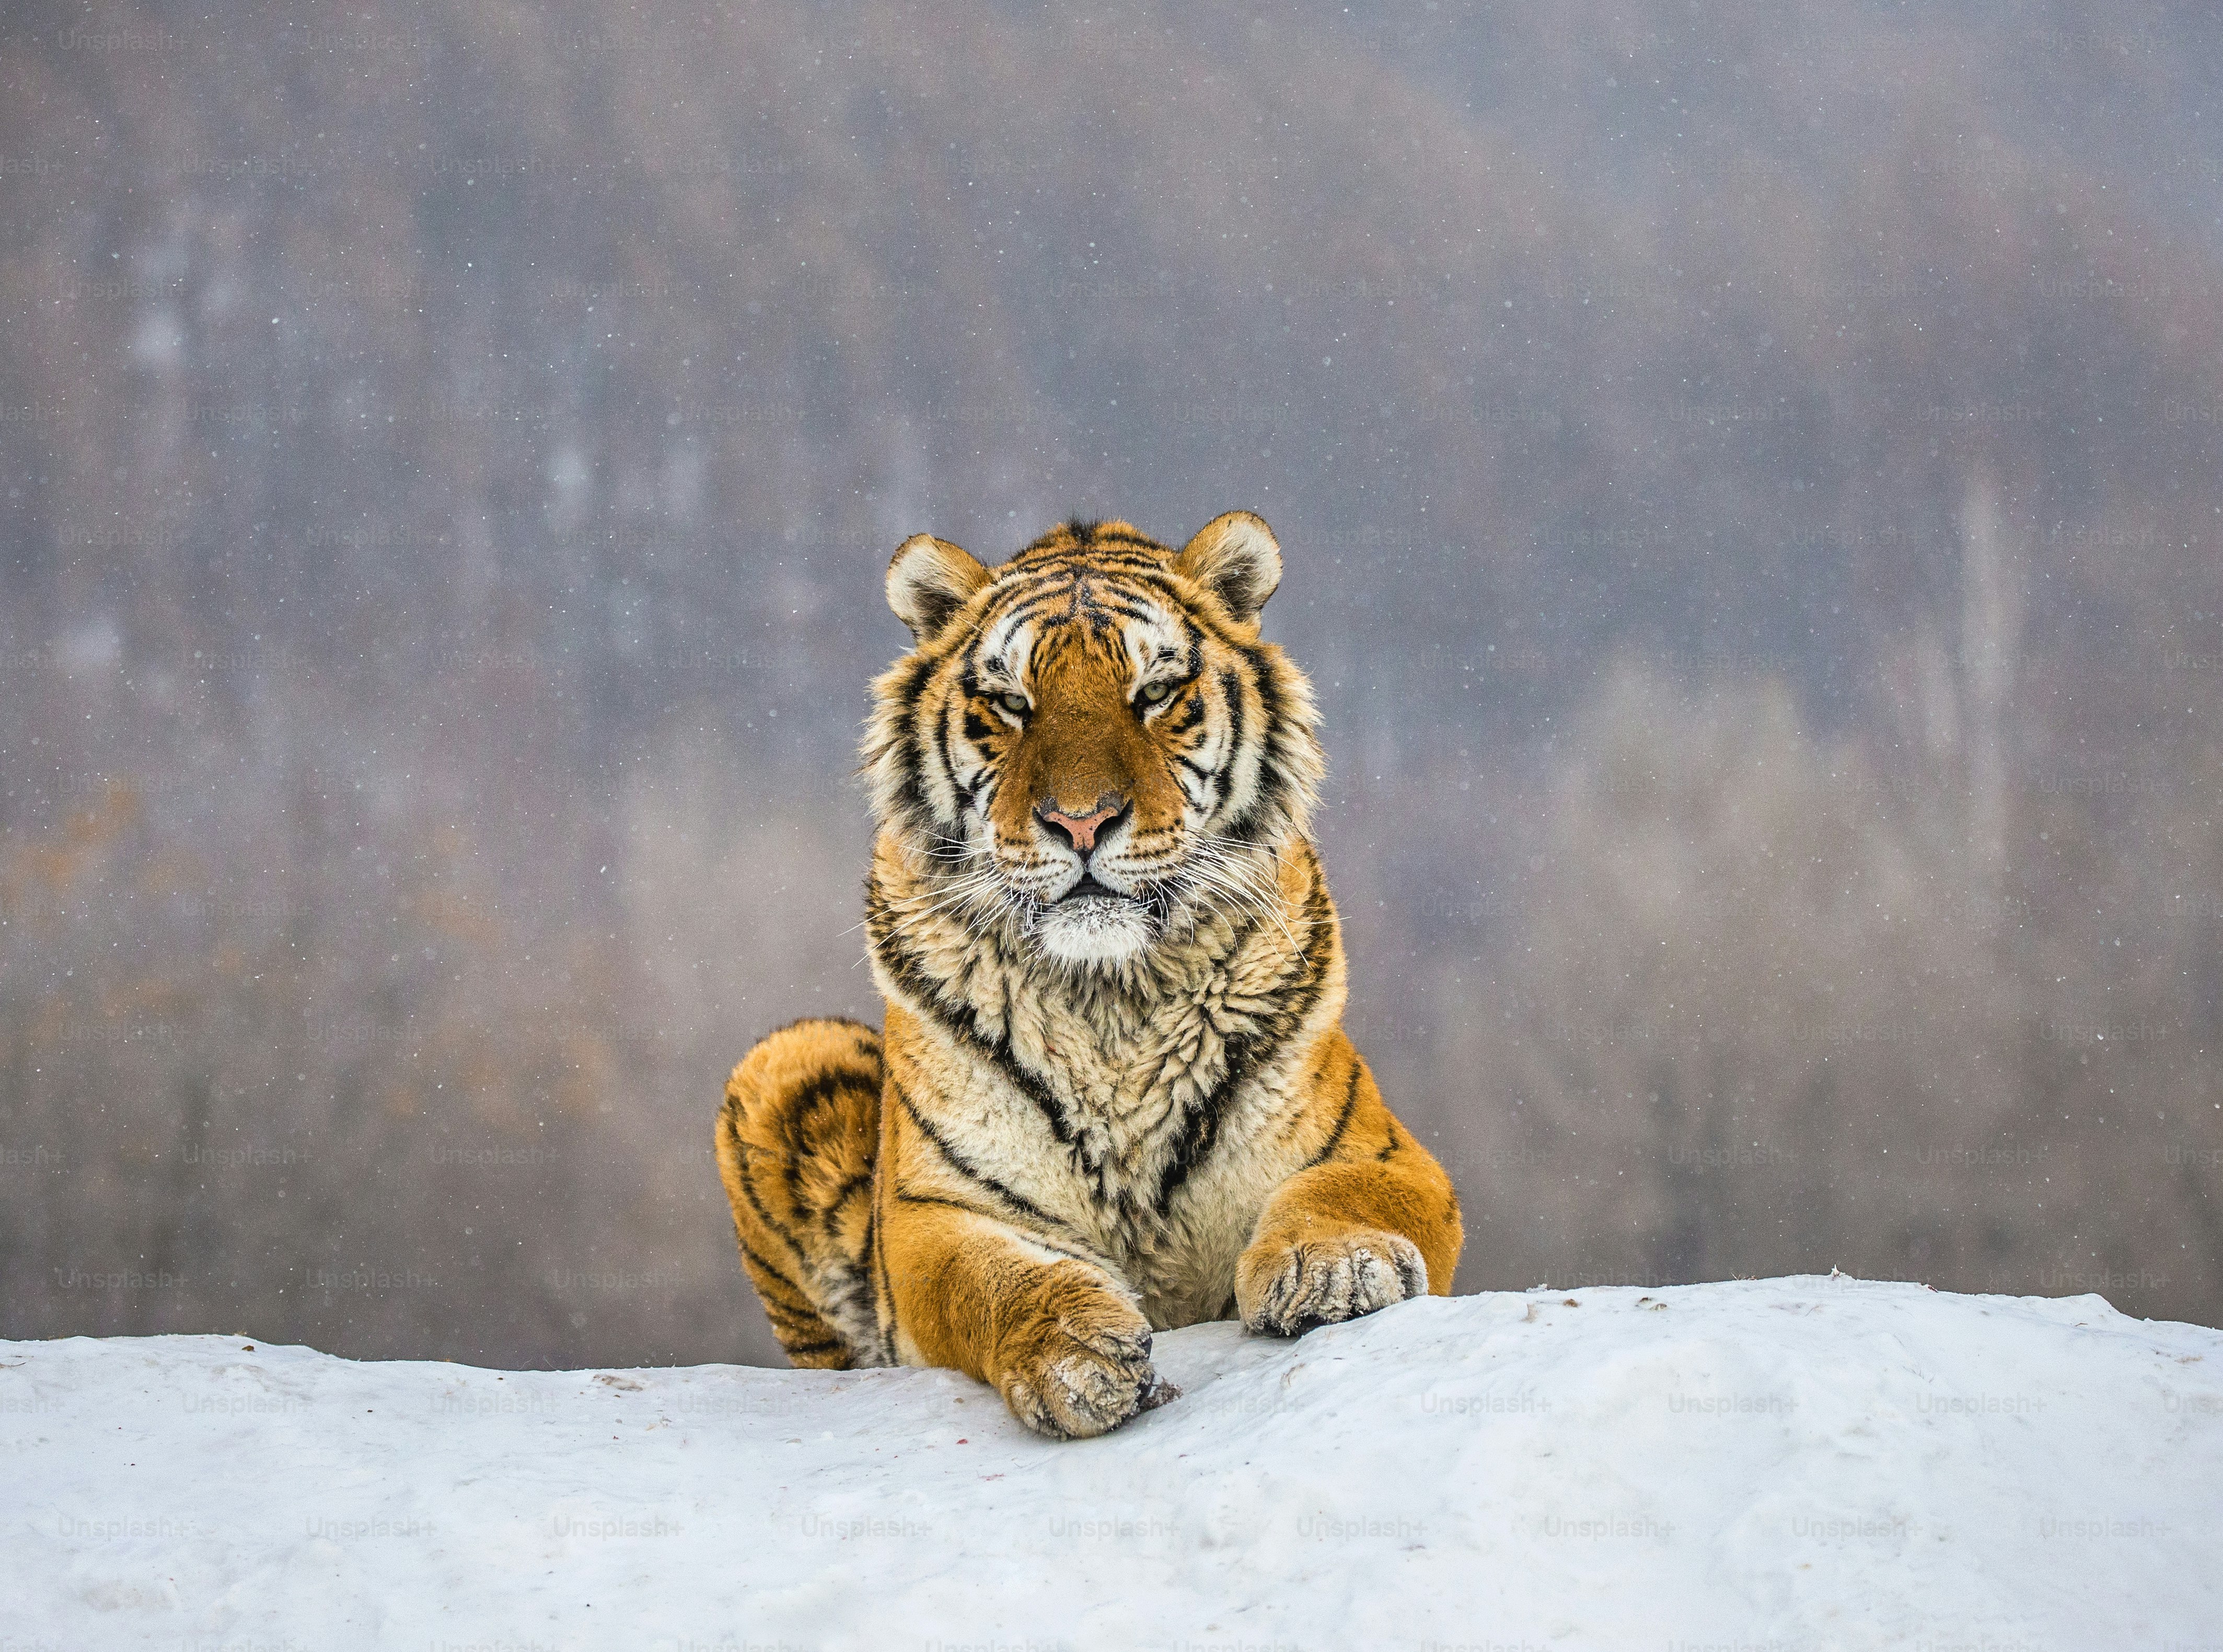 The tiger is one of the most gorgeous creatures on earth, and dedicated Unsplash photographers have ventured into the jungle and captured tigers in all of their glory. You can use these tiger images for free, no need for a jungle visit!